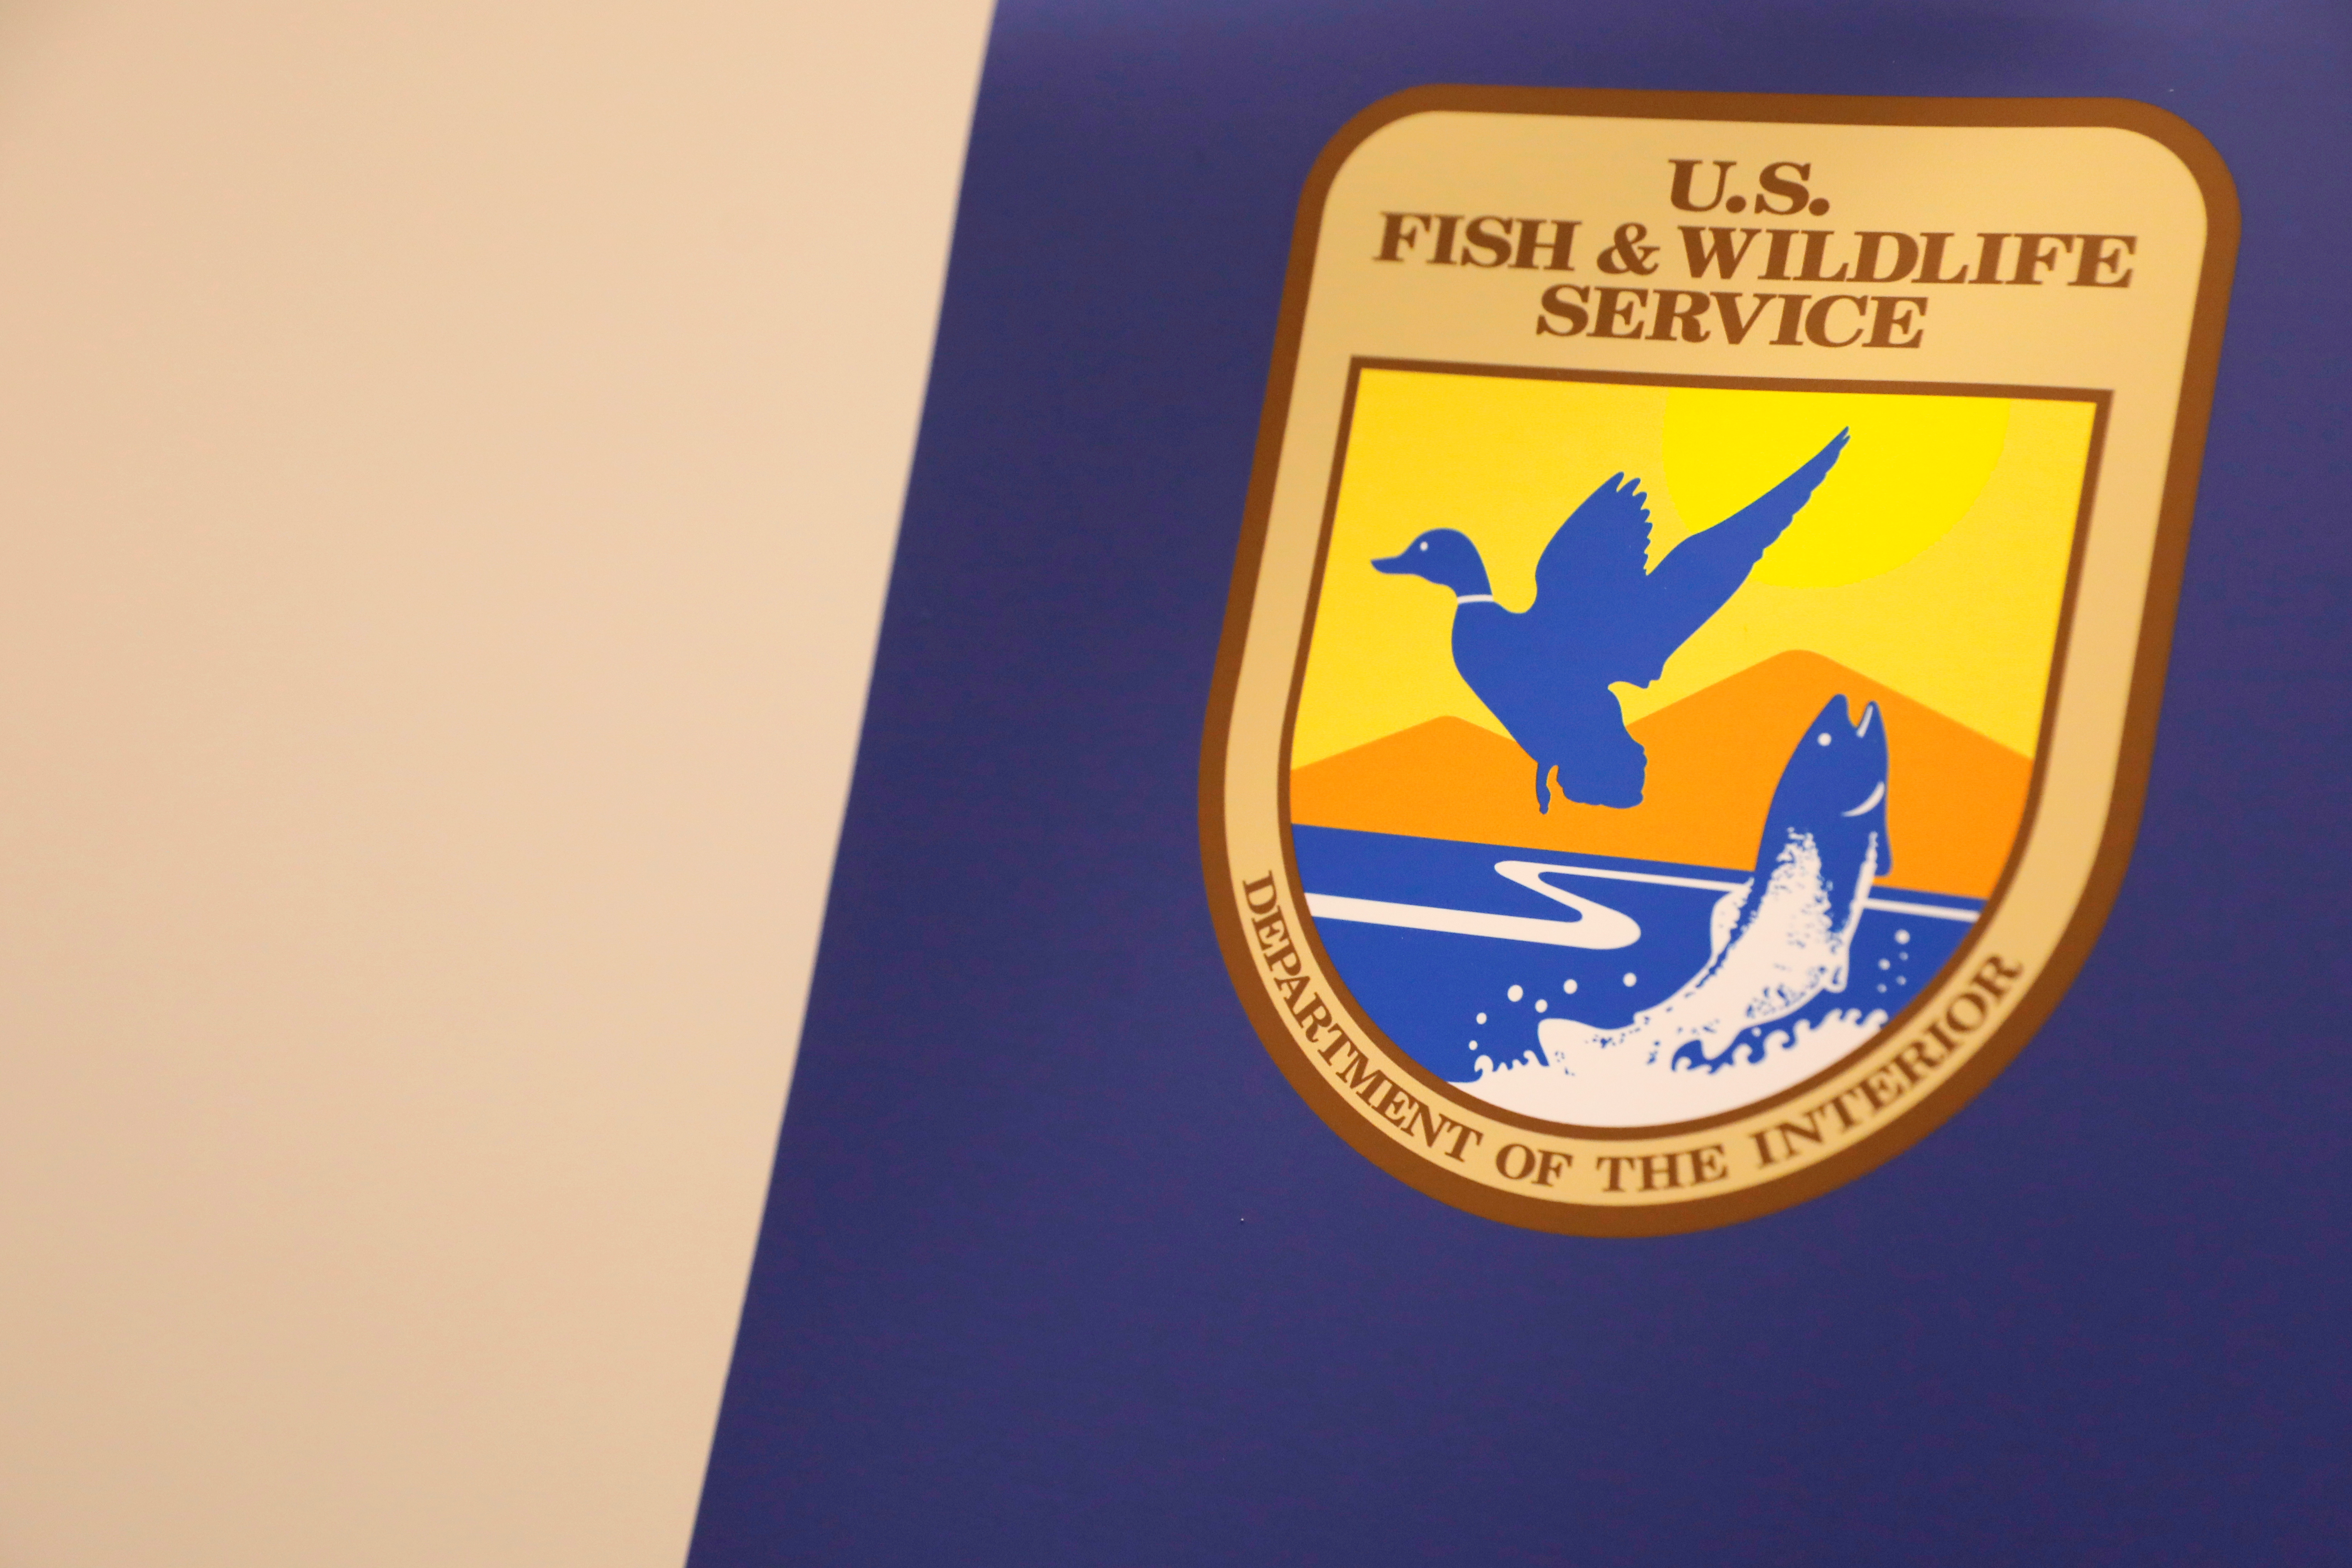 The seal of the U.S. Fish and Wildlife Service is seen at their headquarters in Bailey's Crossroads, Virginia, U.S.